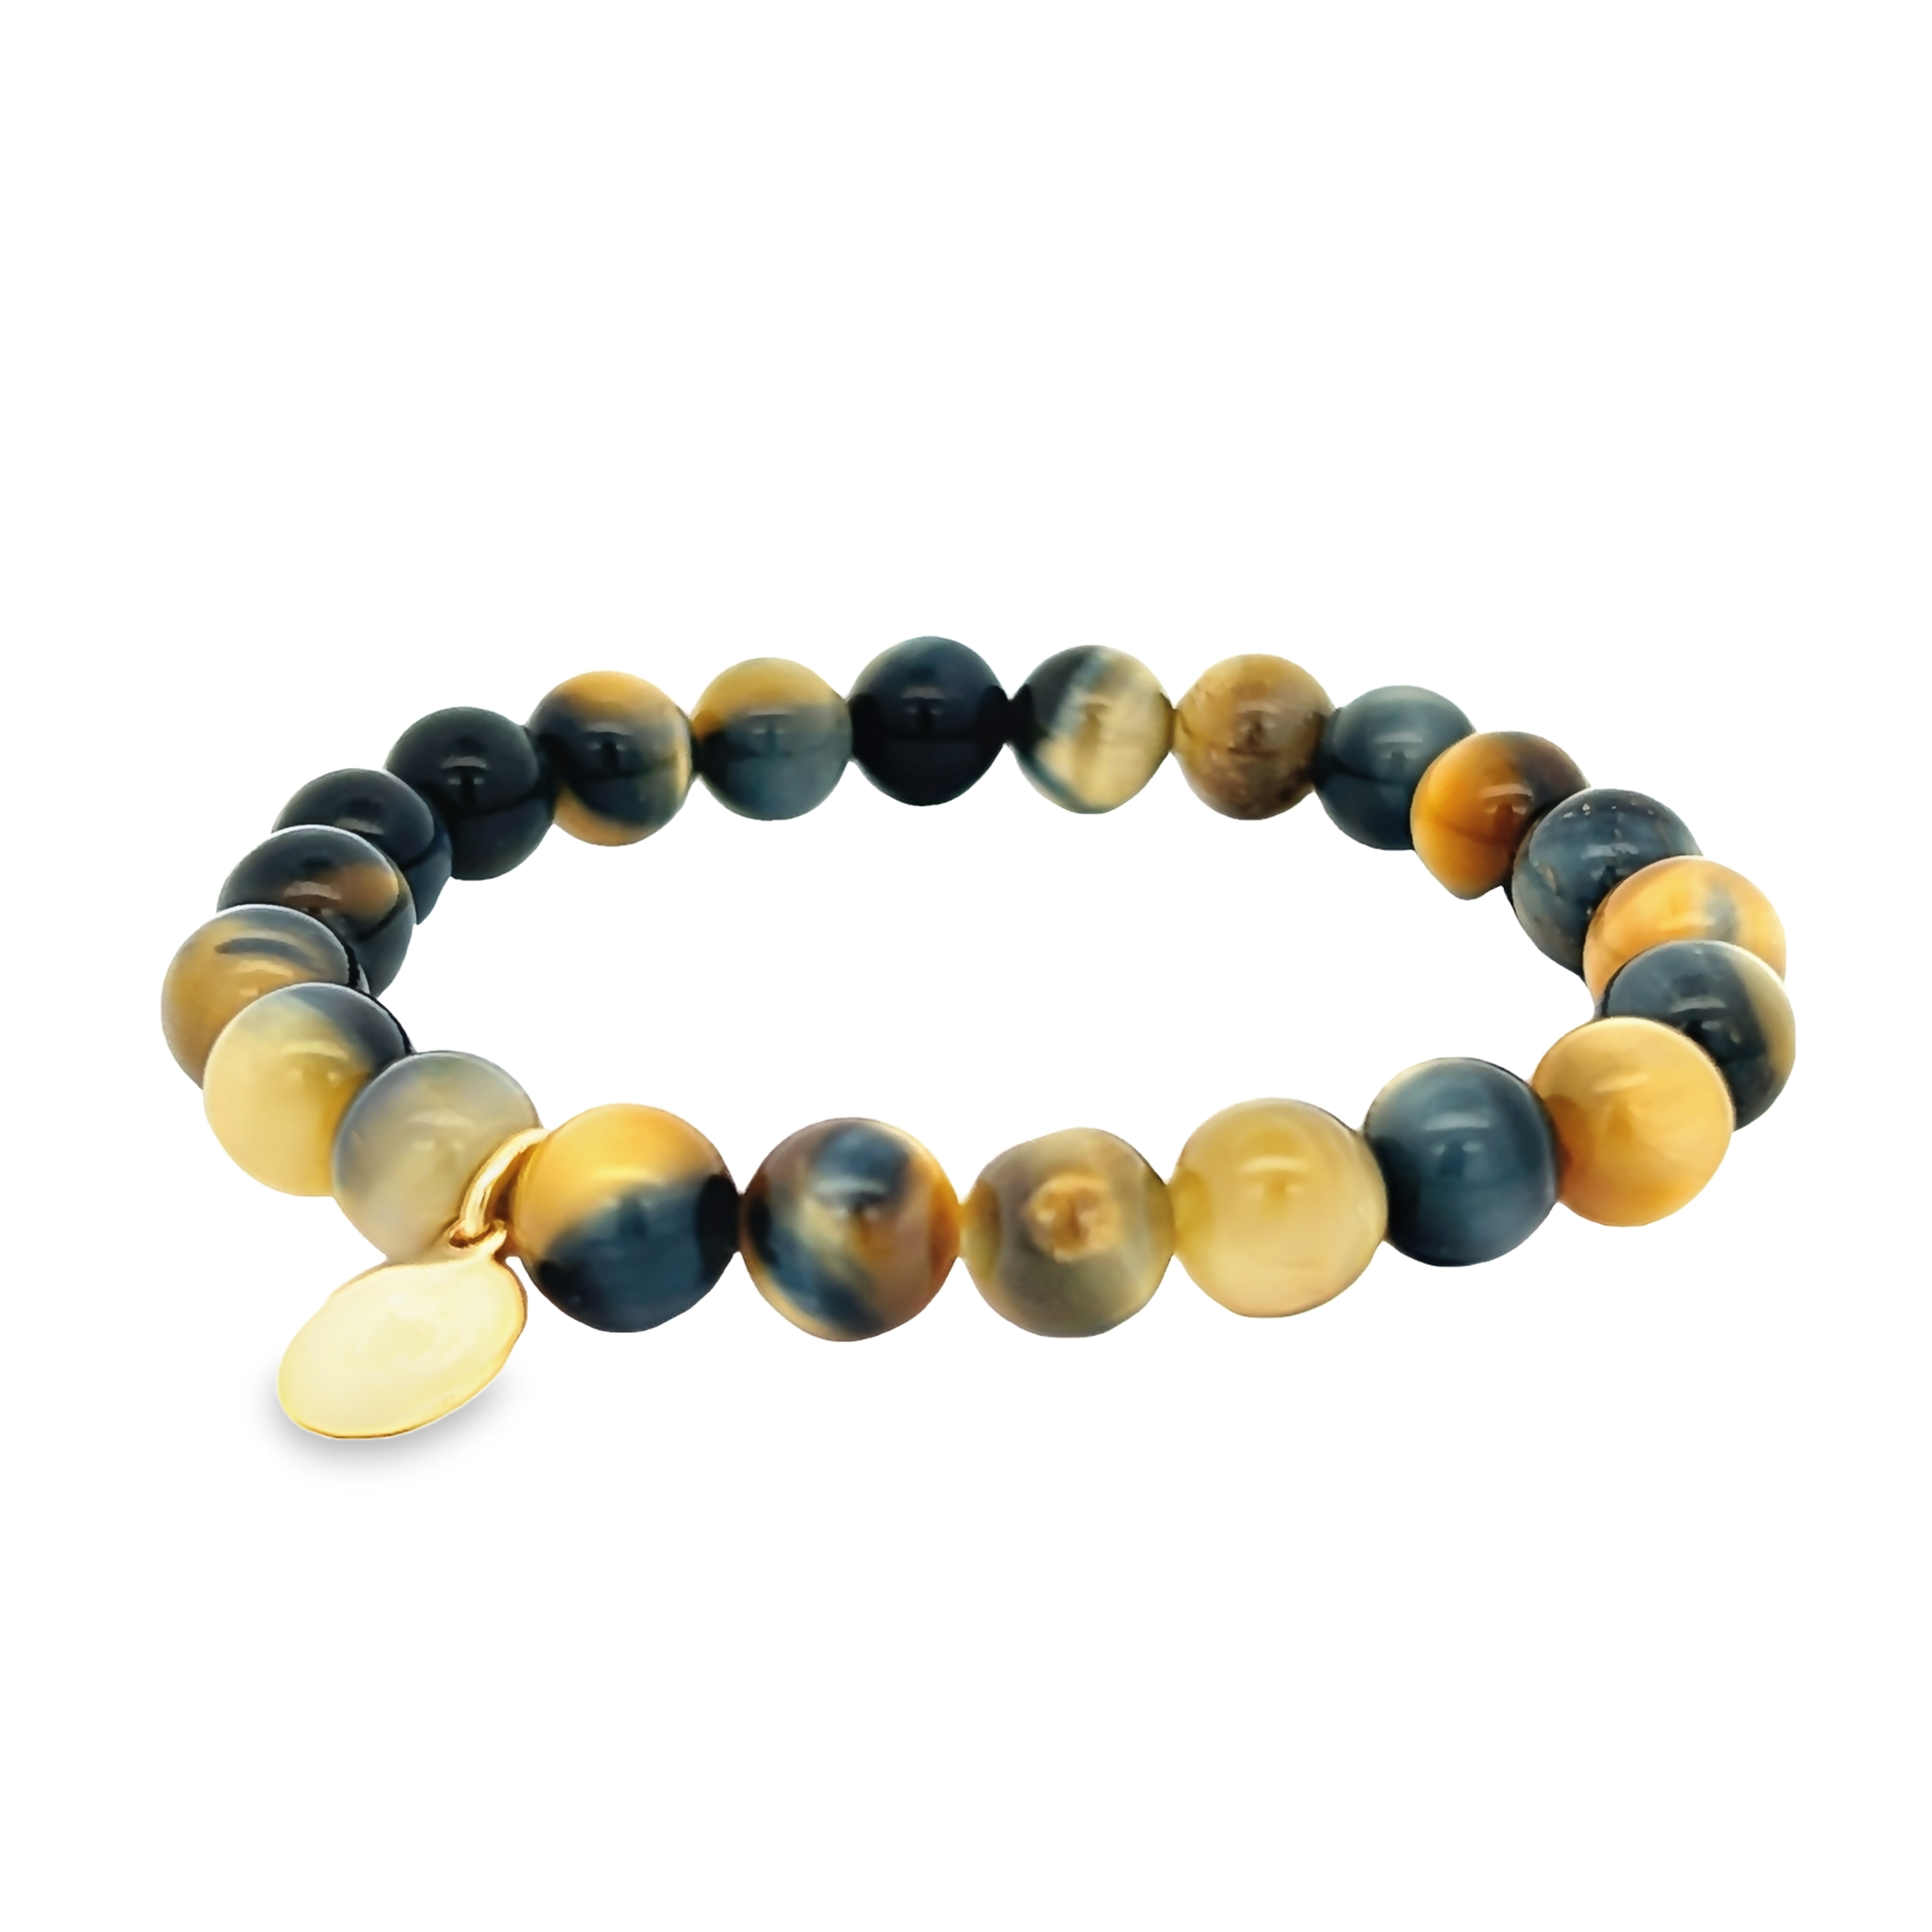 Tigers Eye Bracelet - Boys And Girls Clubs Of Frederick County